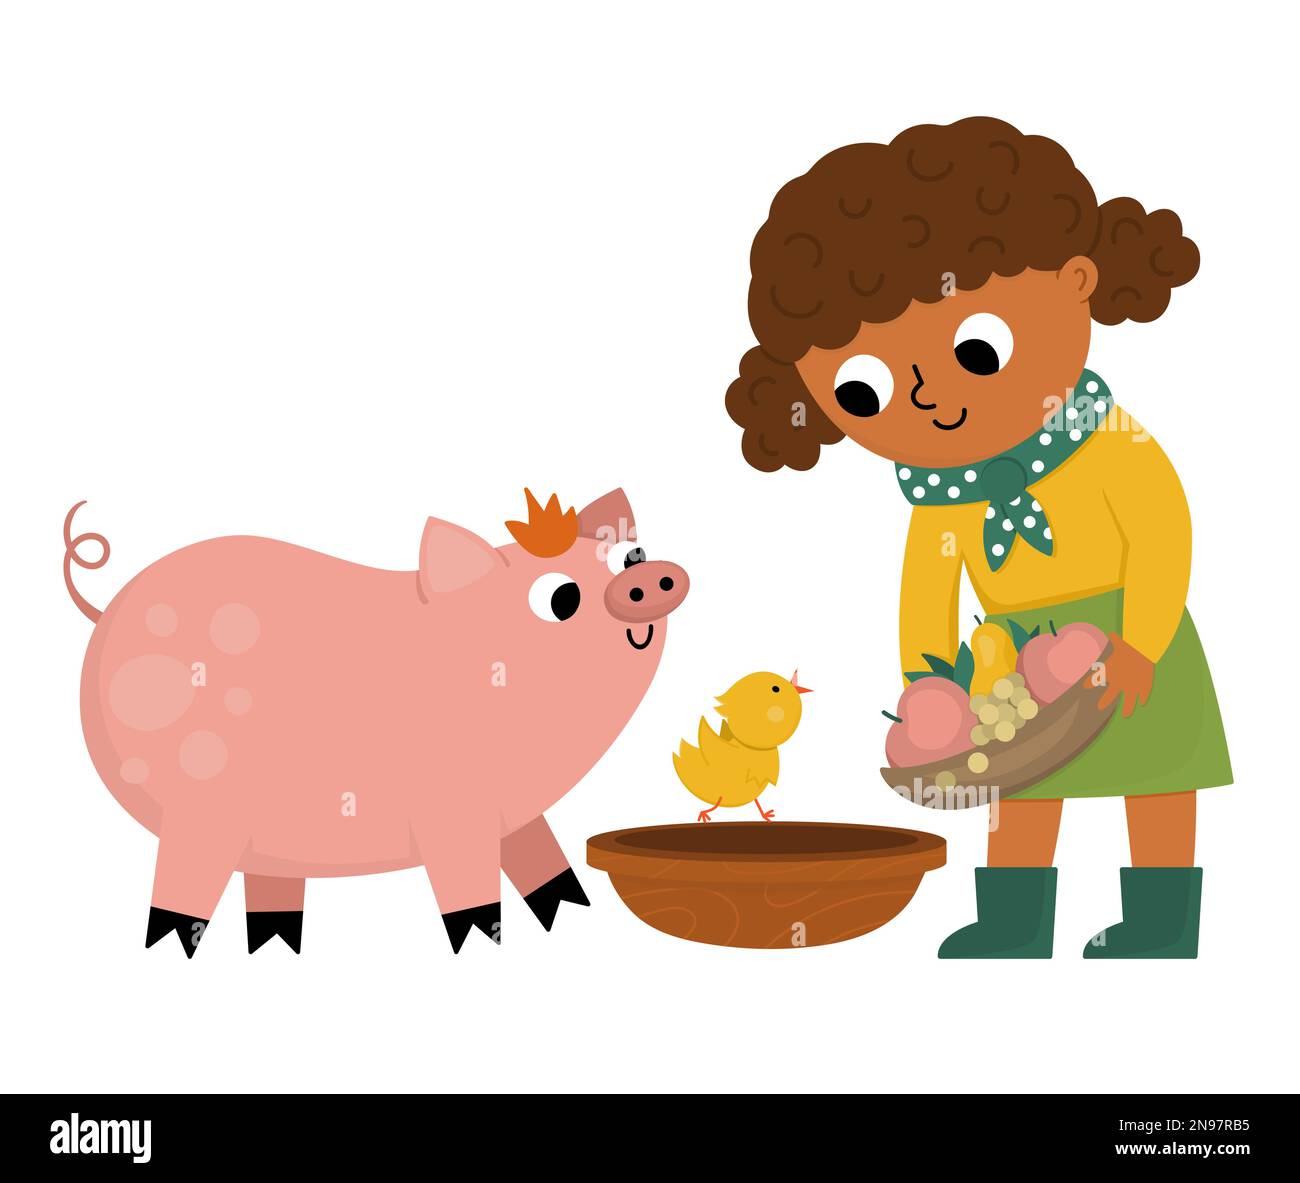 Vector cattle breeder icon. Farmer girl feeding animals. Cute kid doing agricultural work. Rural country scene. Child with cute pig and chicken. Funny Stock Vector